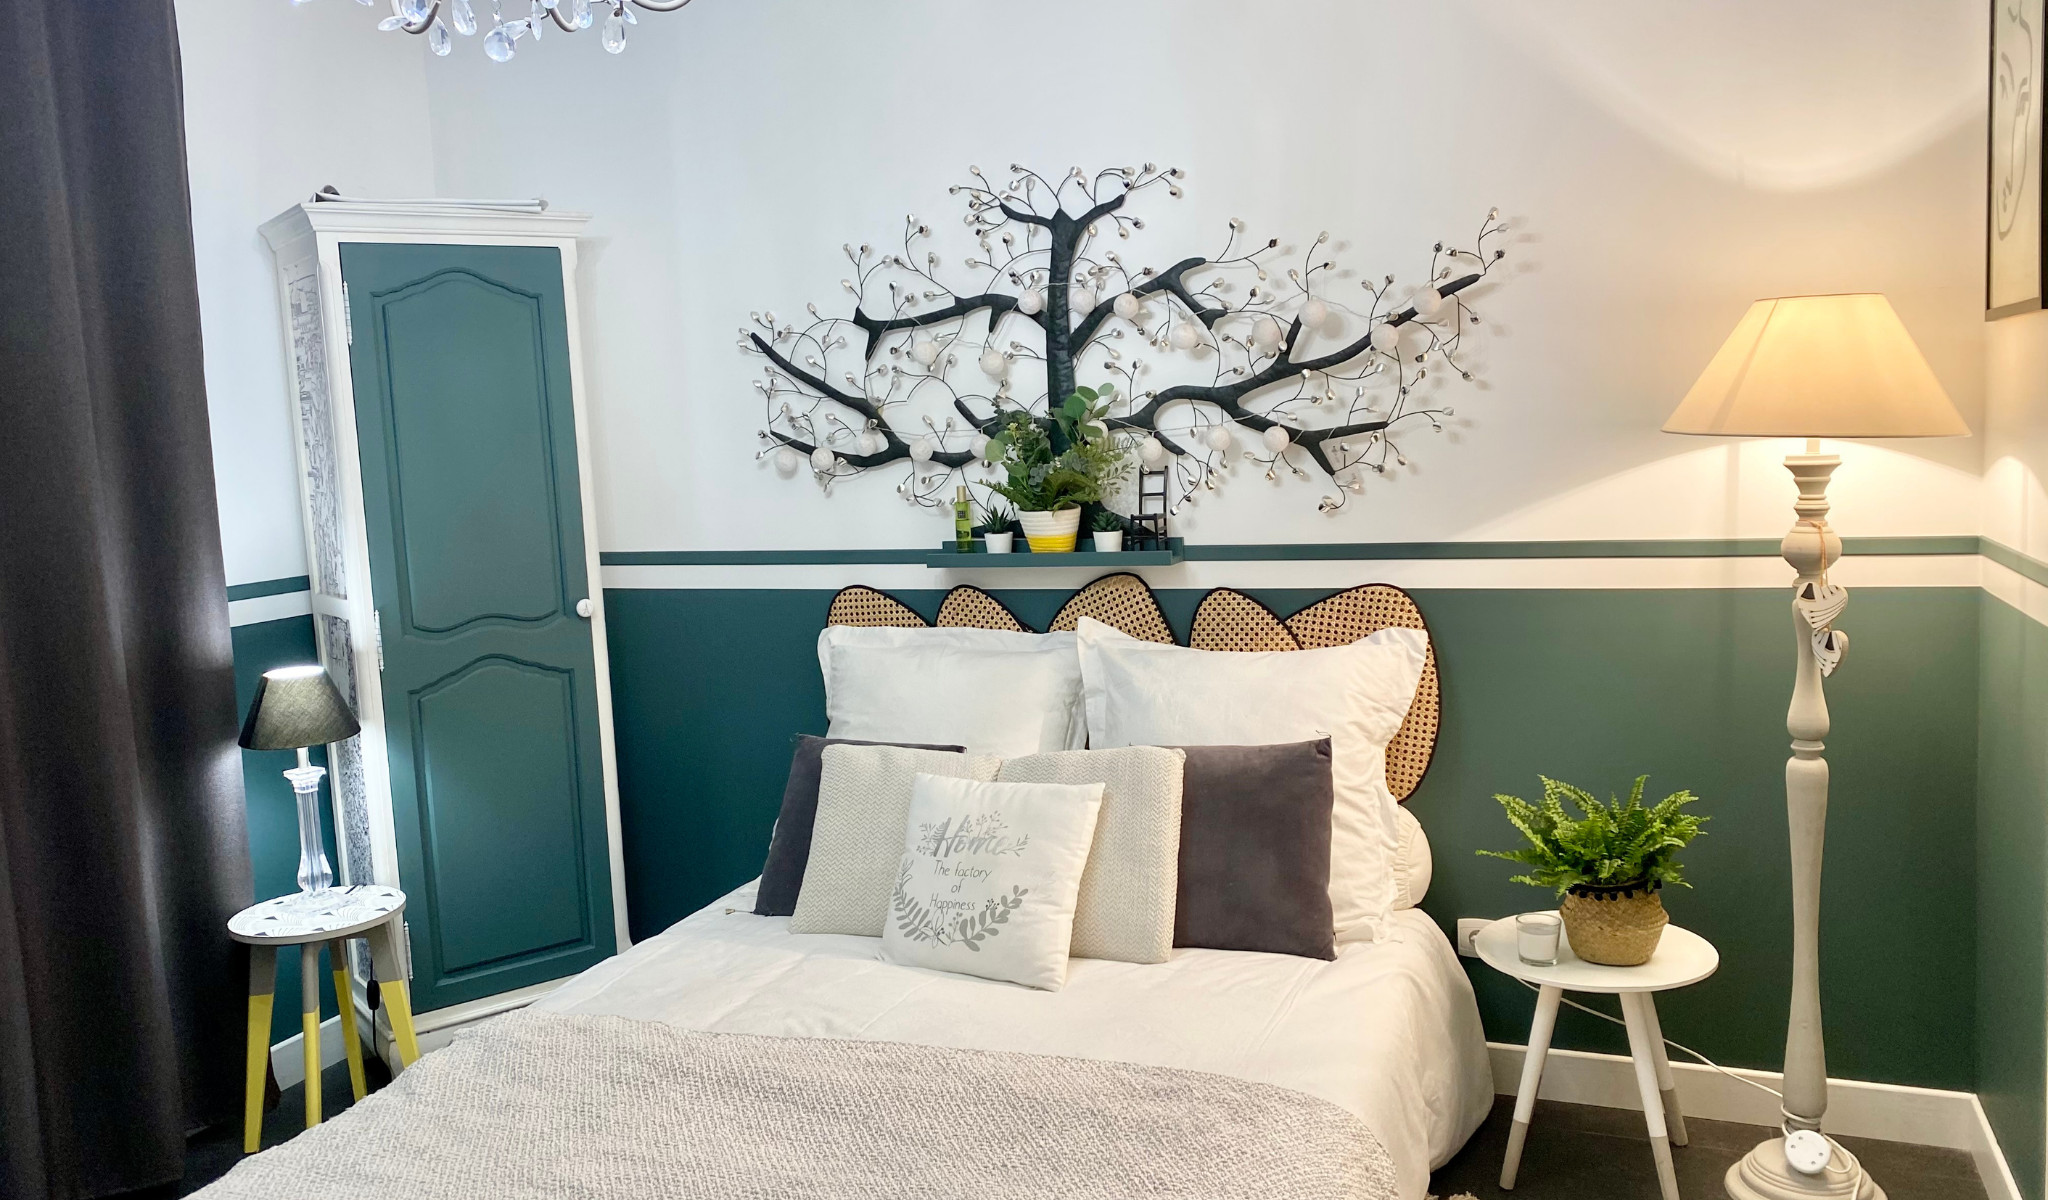 75 Wainscoting Bedroom with Green Walls Ideas You'll Love - April, 2023 |  Houzz